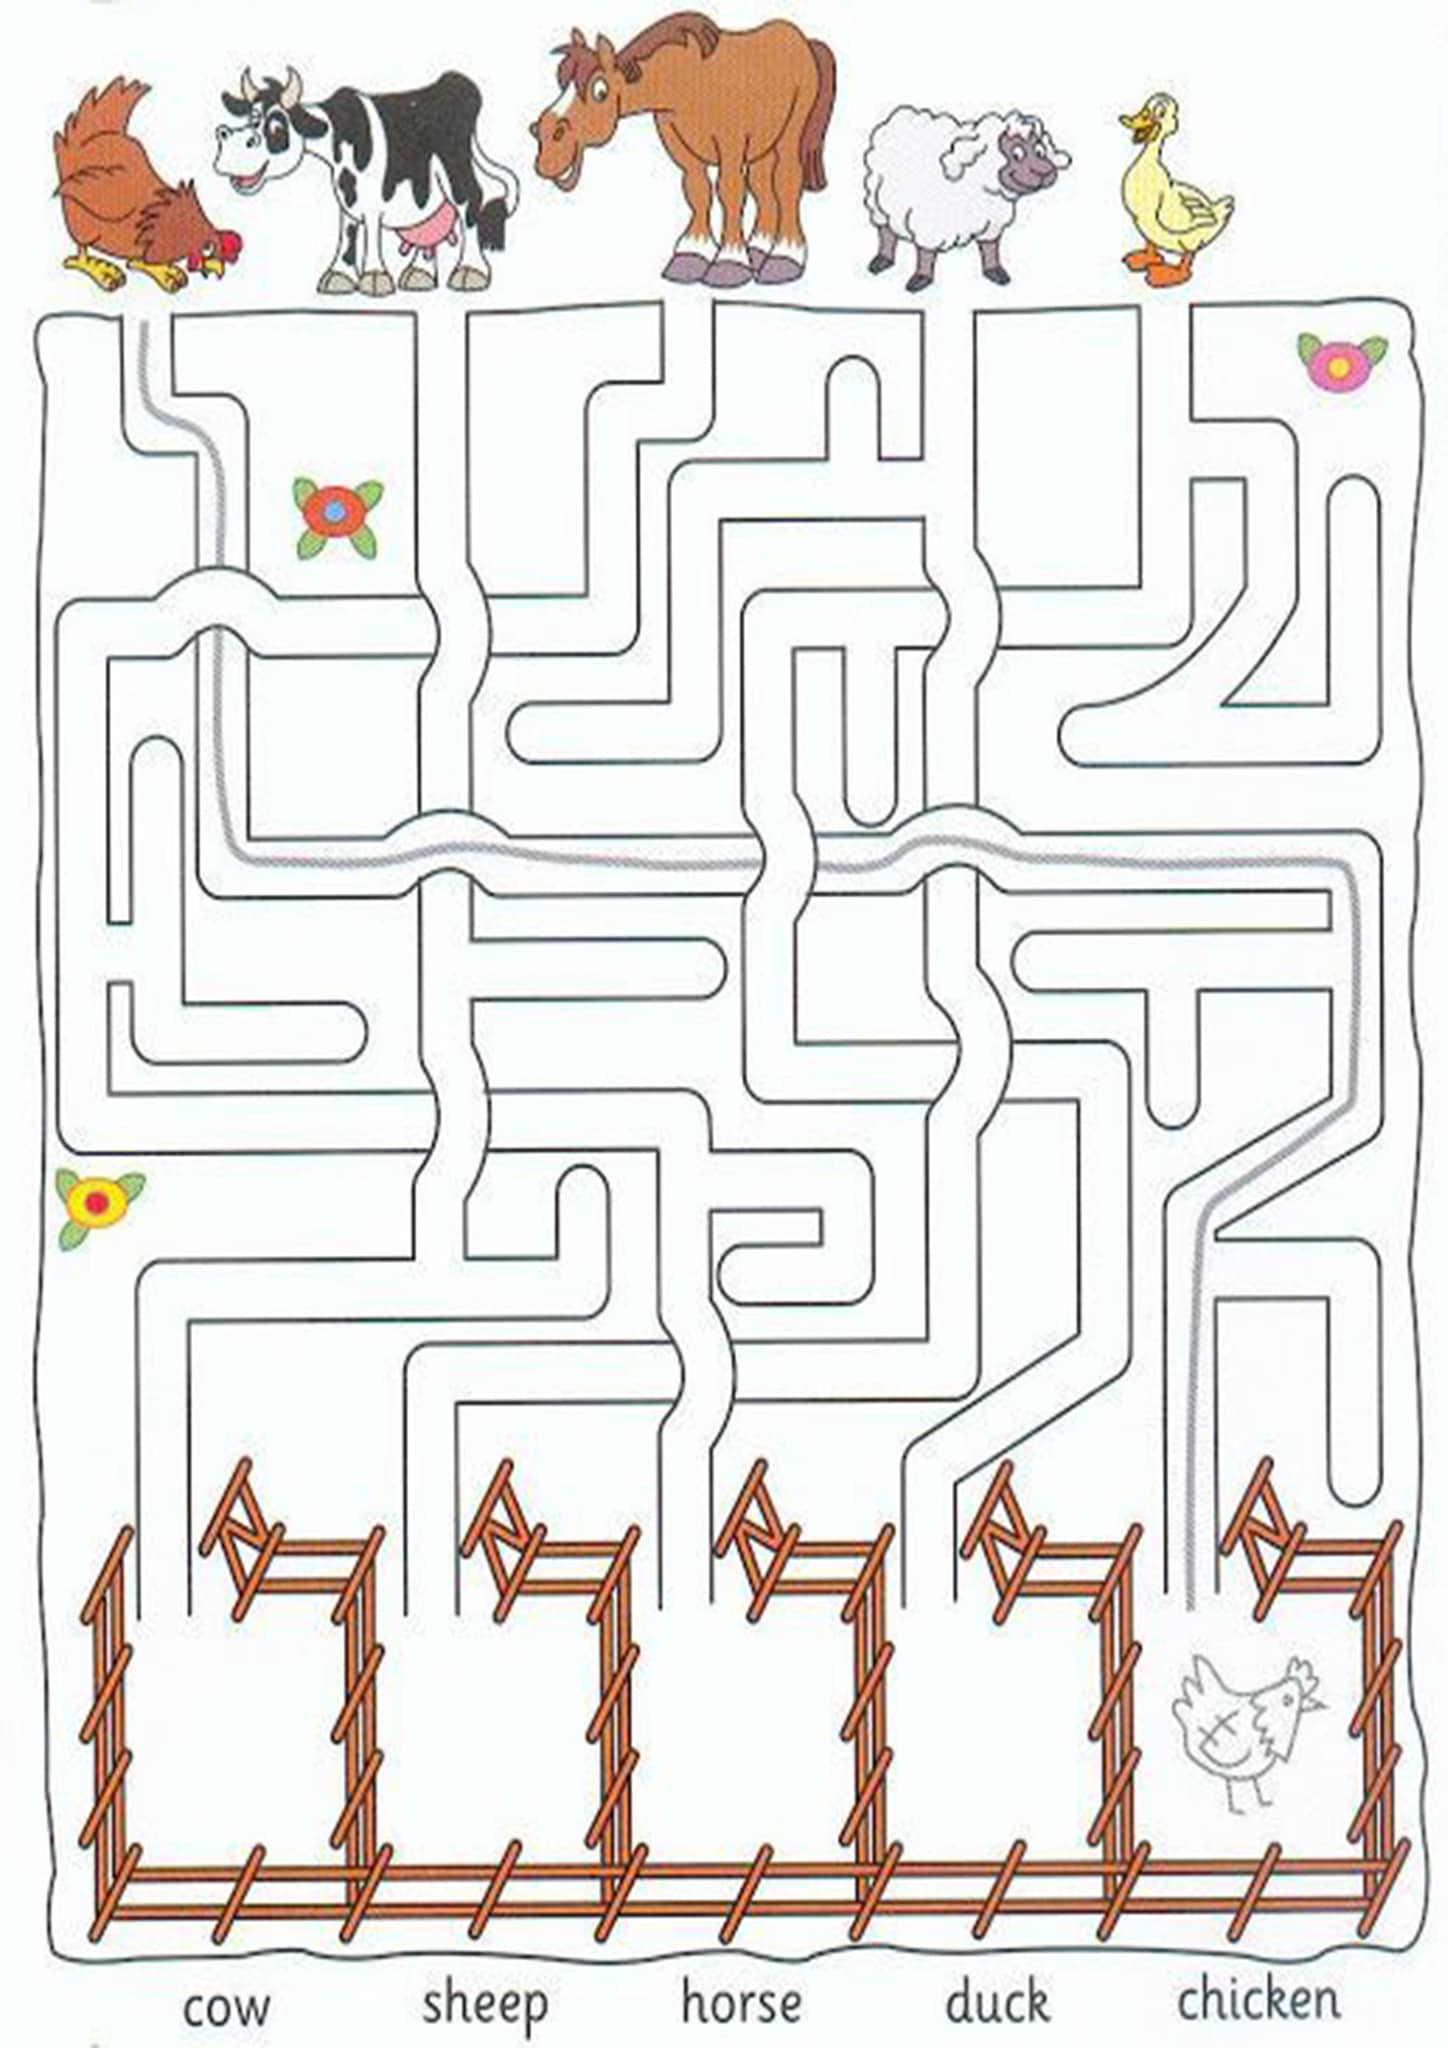 printable-mazes-best-coloring-pages-for-kids-maze-help-the-love